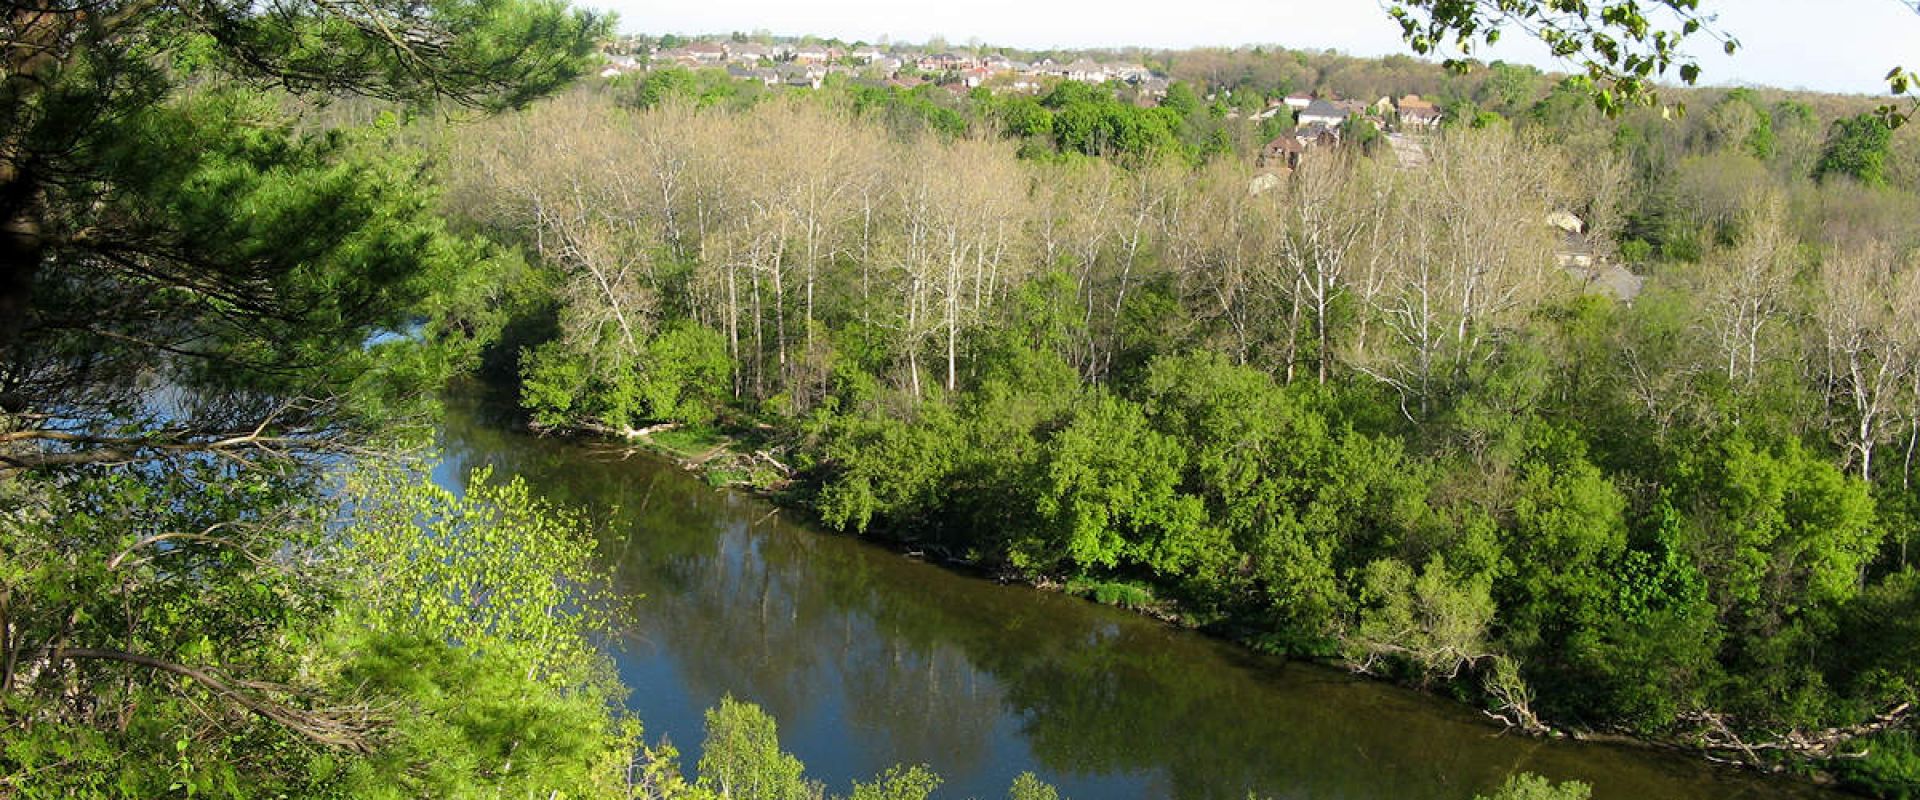 The Thames River flows by Komoka Bluff, with a town in the distance.